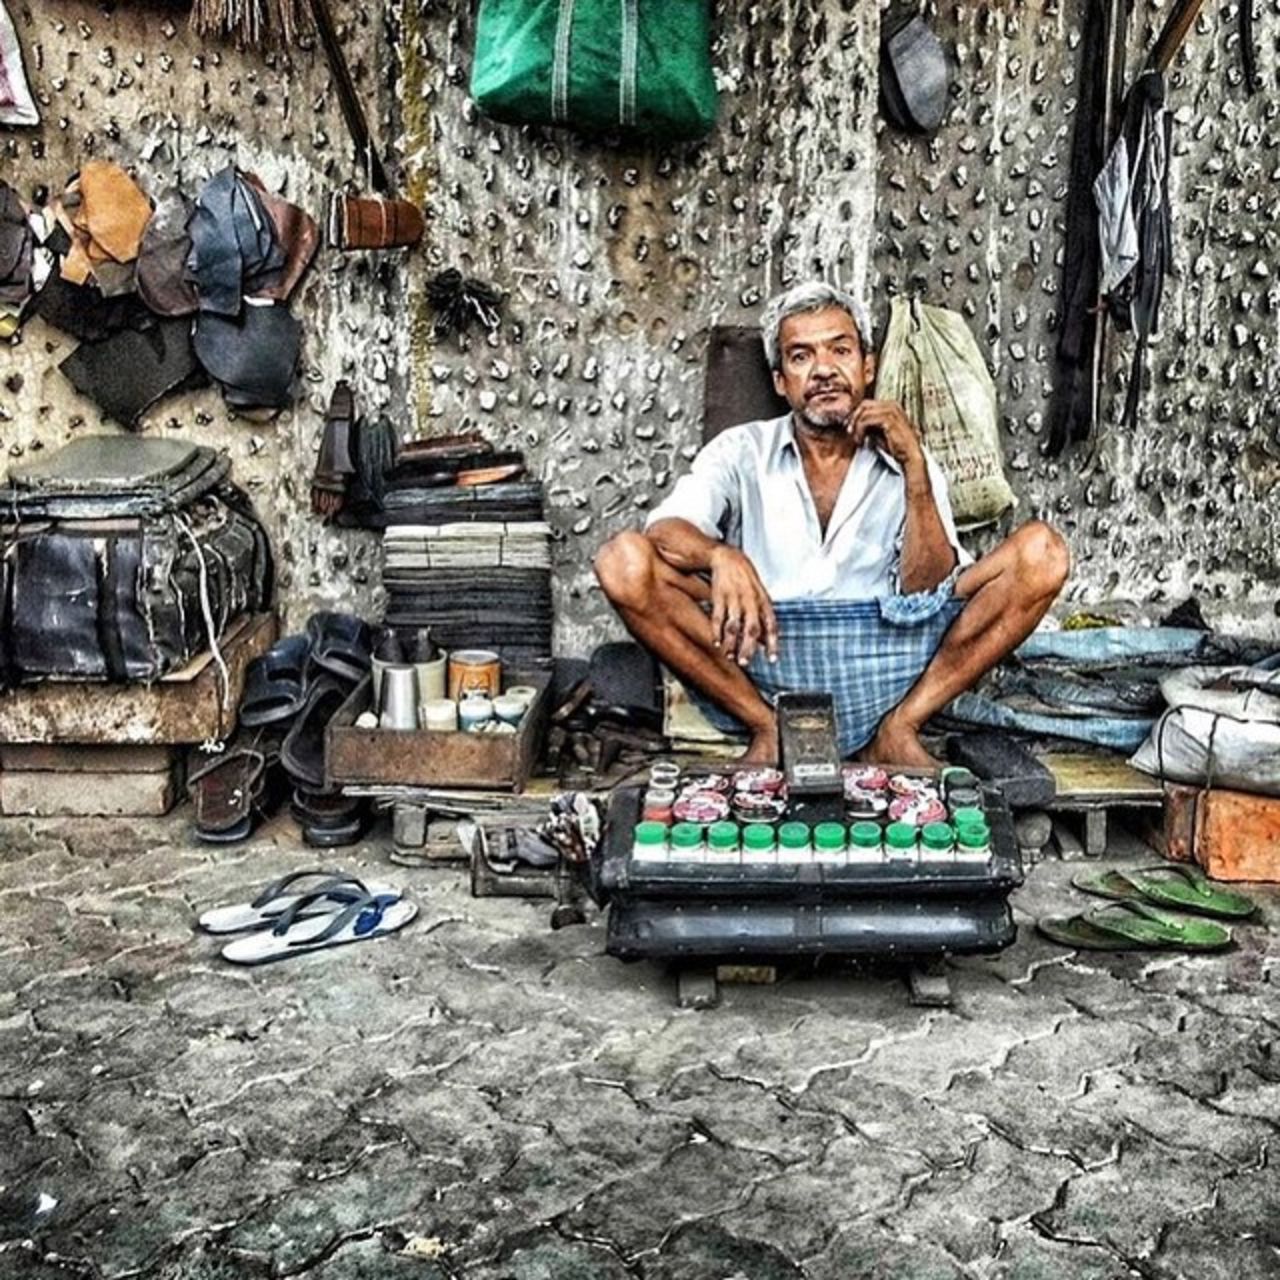 A roadside <a href="https://instagram.com/p/4q2lO3mQq1/" target="_blank" target="_blank">shoe shiner</a> and cobbler in Calcutta, by Instagrammer <a href="https://instagram.com/suva_09/" target="_blank" target="_blank">@suva_09</a>, a 20-year-old engineering student.<br /><br />"I liked the way he was sitting in a hot afternoon, waiting for his customer. I like to capture the charm of Kolkata, my city -- its uniqueness, its people, its heritage. Instagram inspires me to wander  more and click more photos. I want people from all over the world to see Kolkata and love its charm through my photographs."<br />